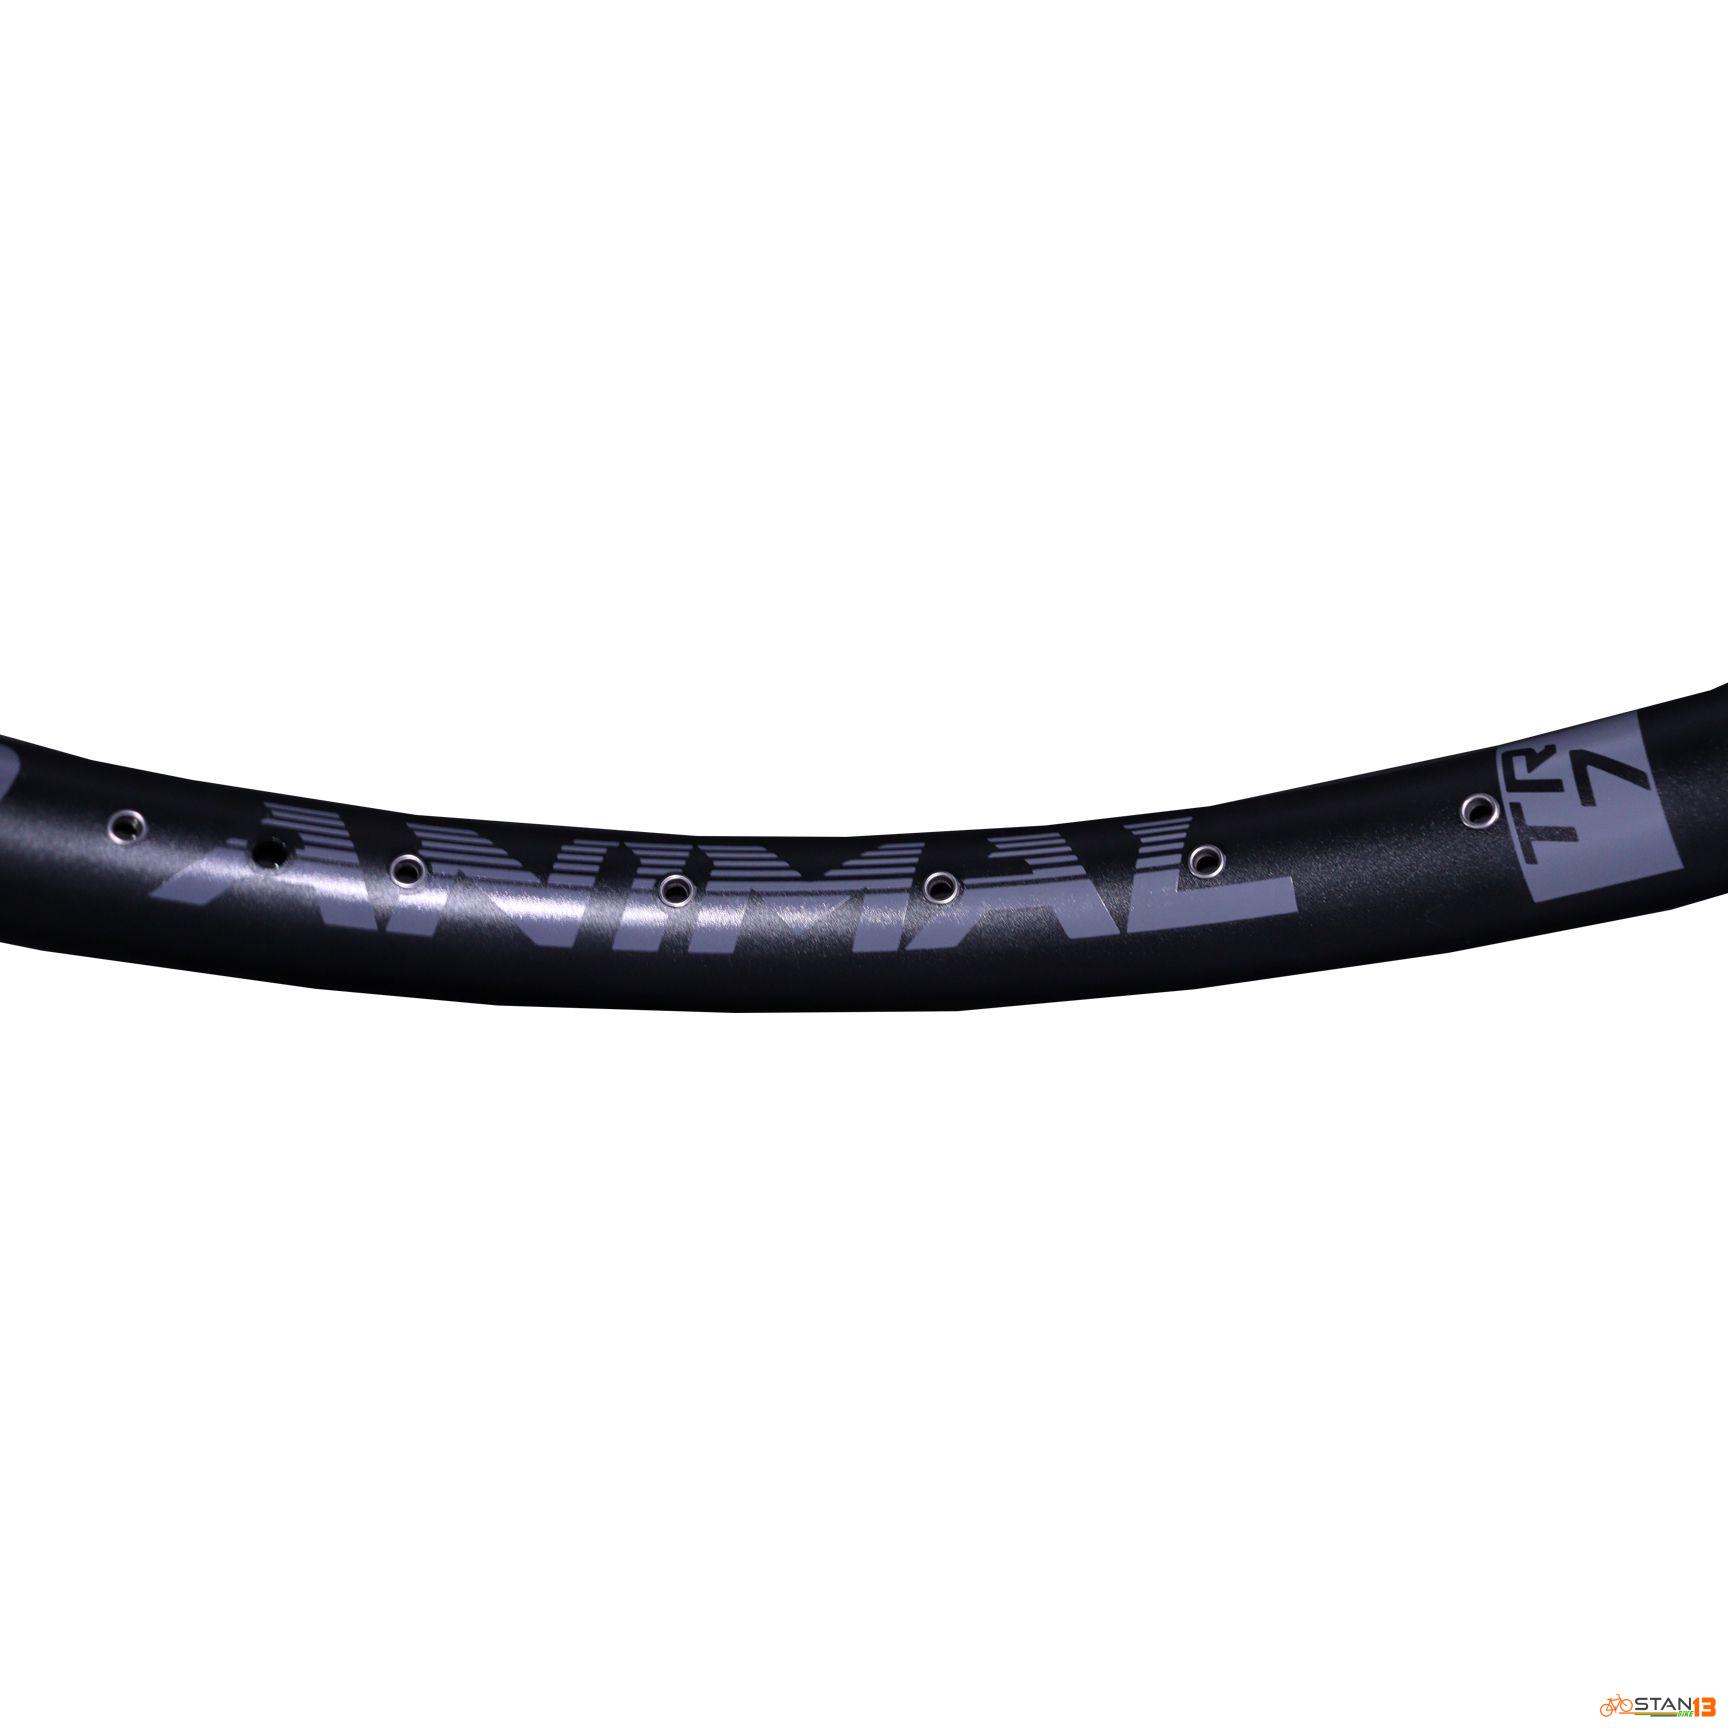 Rim Weapon Animal TR7 27.5 Enduro SUPER STRONG RIMS 40mm Outer